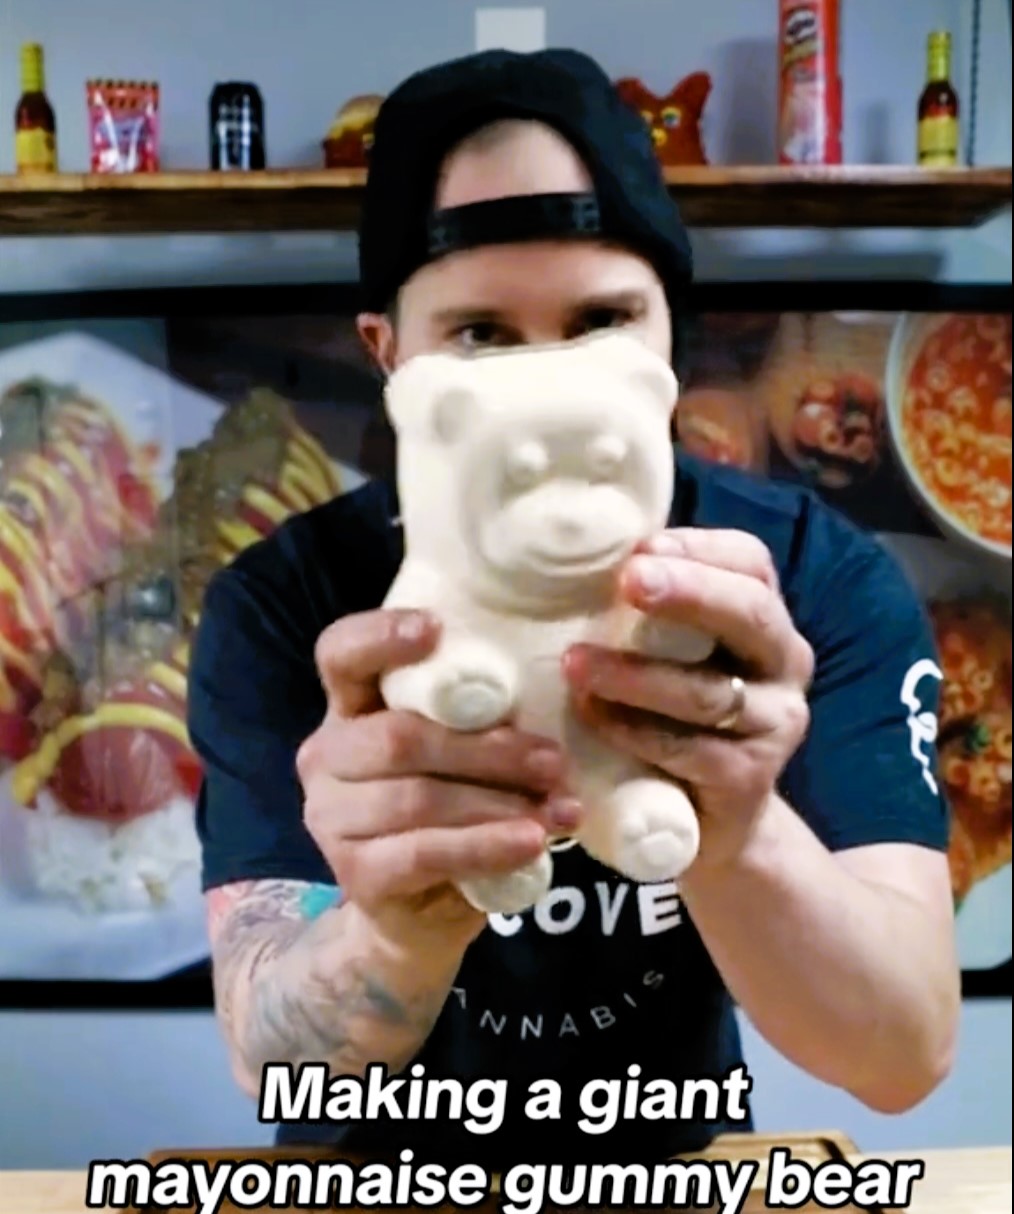 The Vulgar Chef, known for his unconventional food creations, stirred controversy with a mayonnaise gummy bear. Mixing mayo with gelatin, he crafted the treat, evoking strong reactions from viewers.